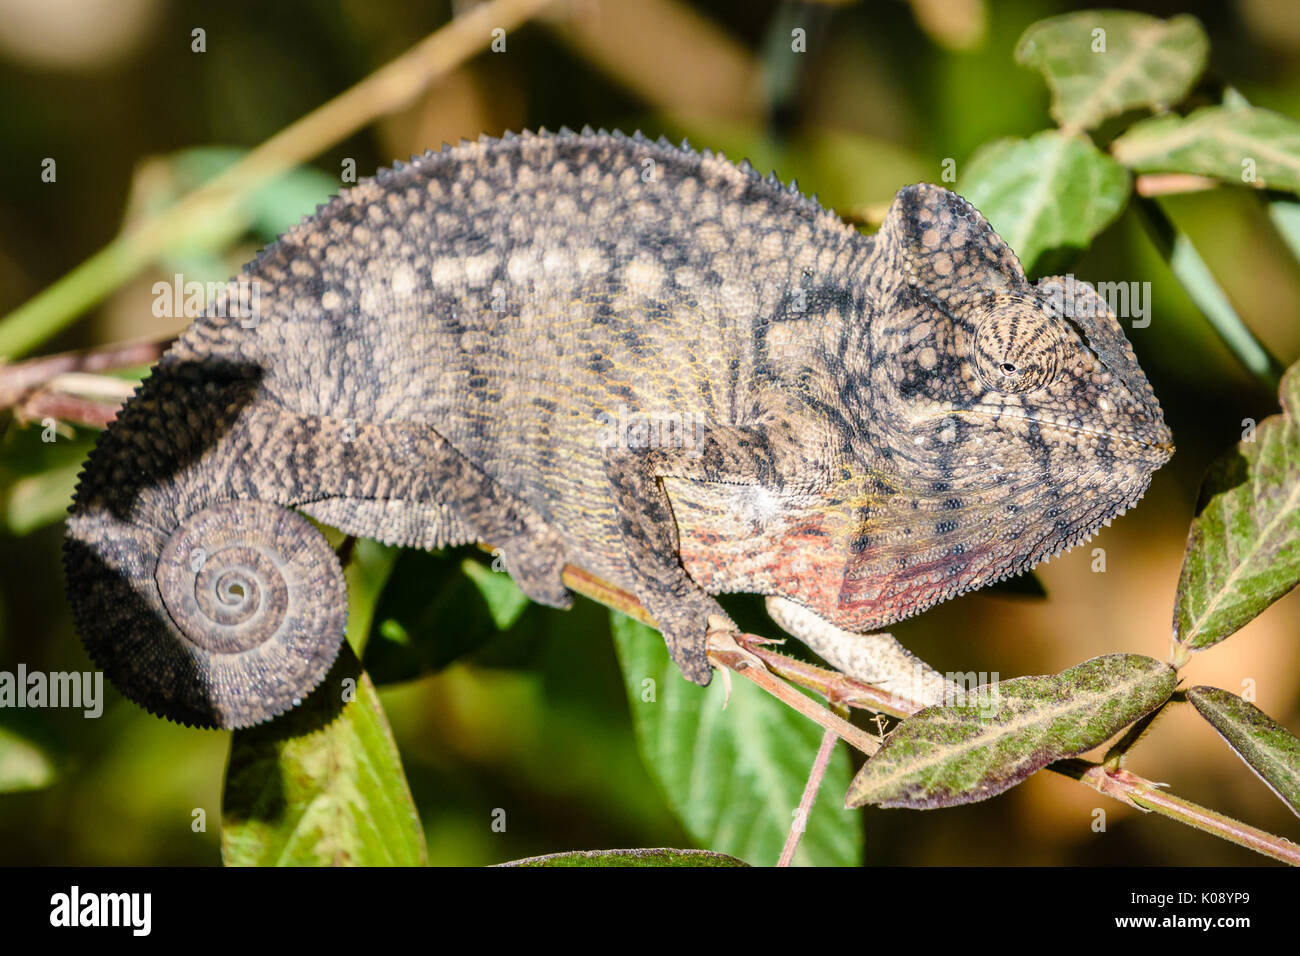 Close up portrait of Chameleon looking at camera in  Madagascar Stock Photo